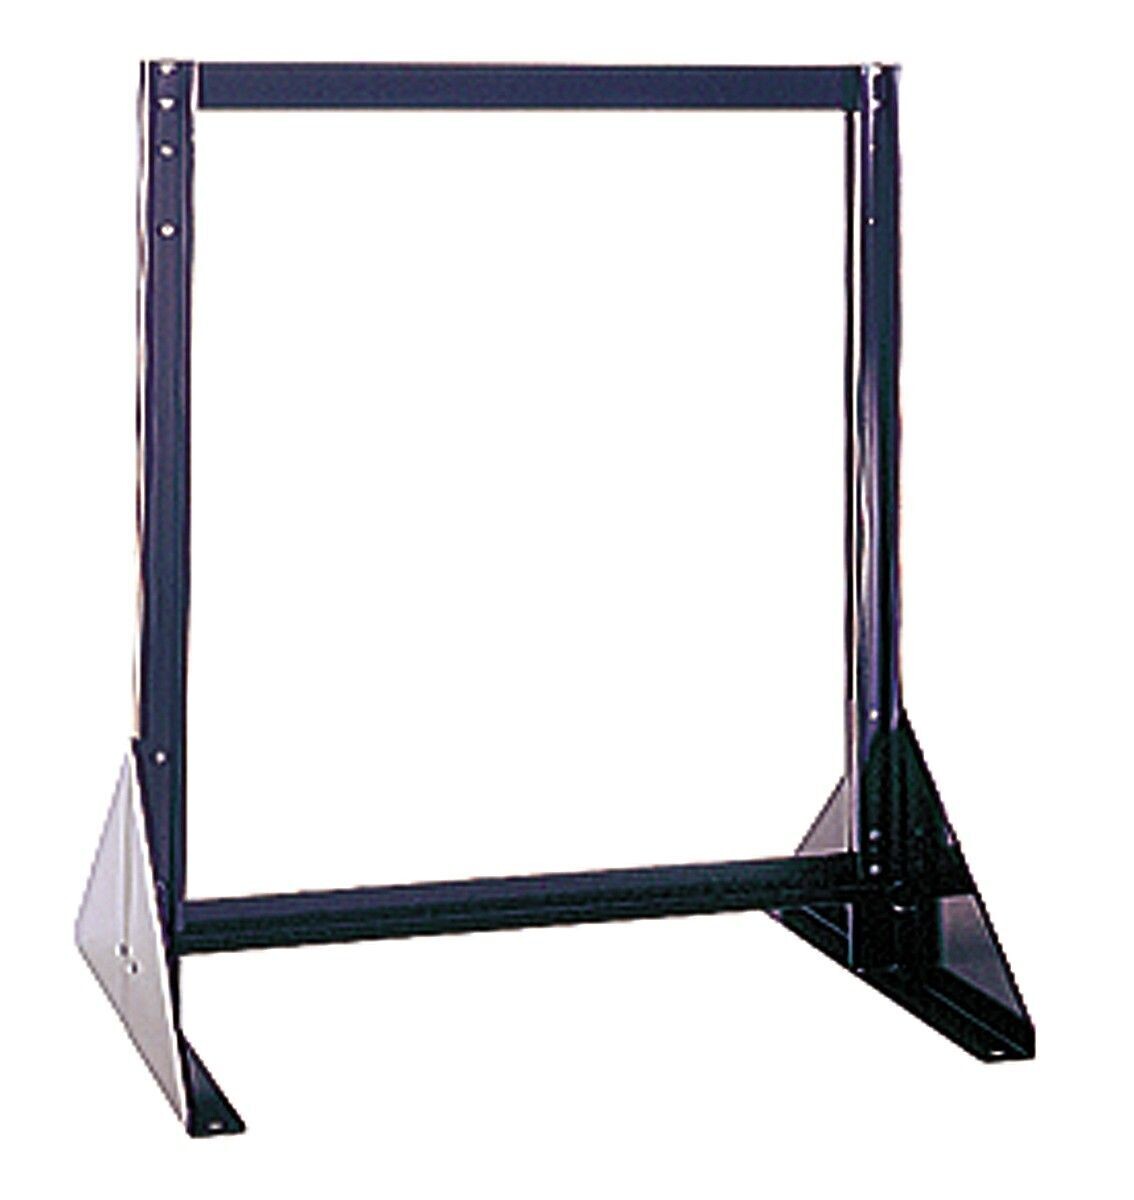 QFS224 - 24" Tip-Out bin 2-sided frame